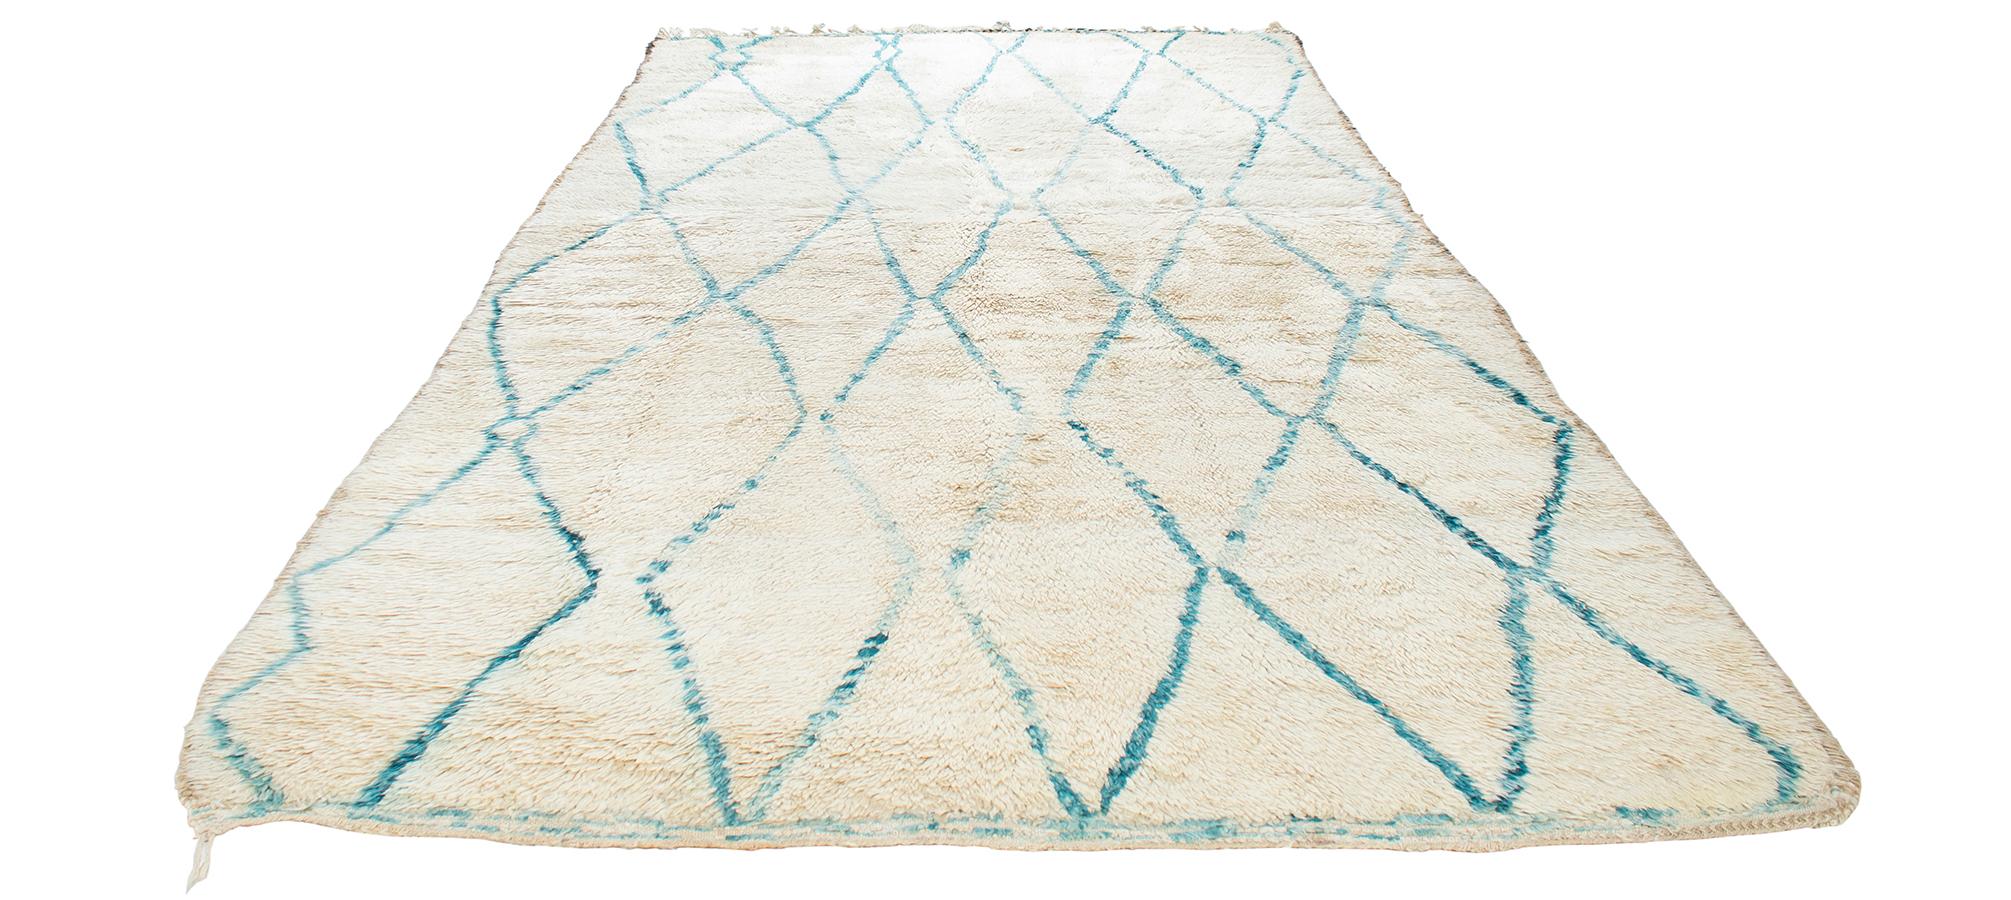 Vintage Beni Ourain Berber Tribal Moroccan Rug In Excellent Condition For Sale In New York, NY